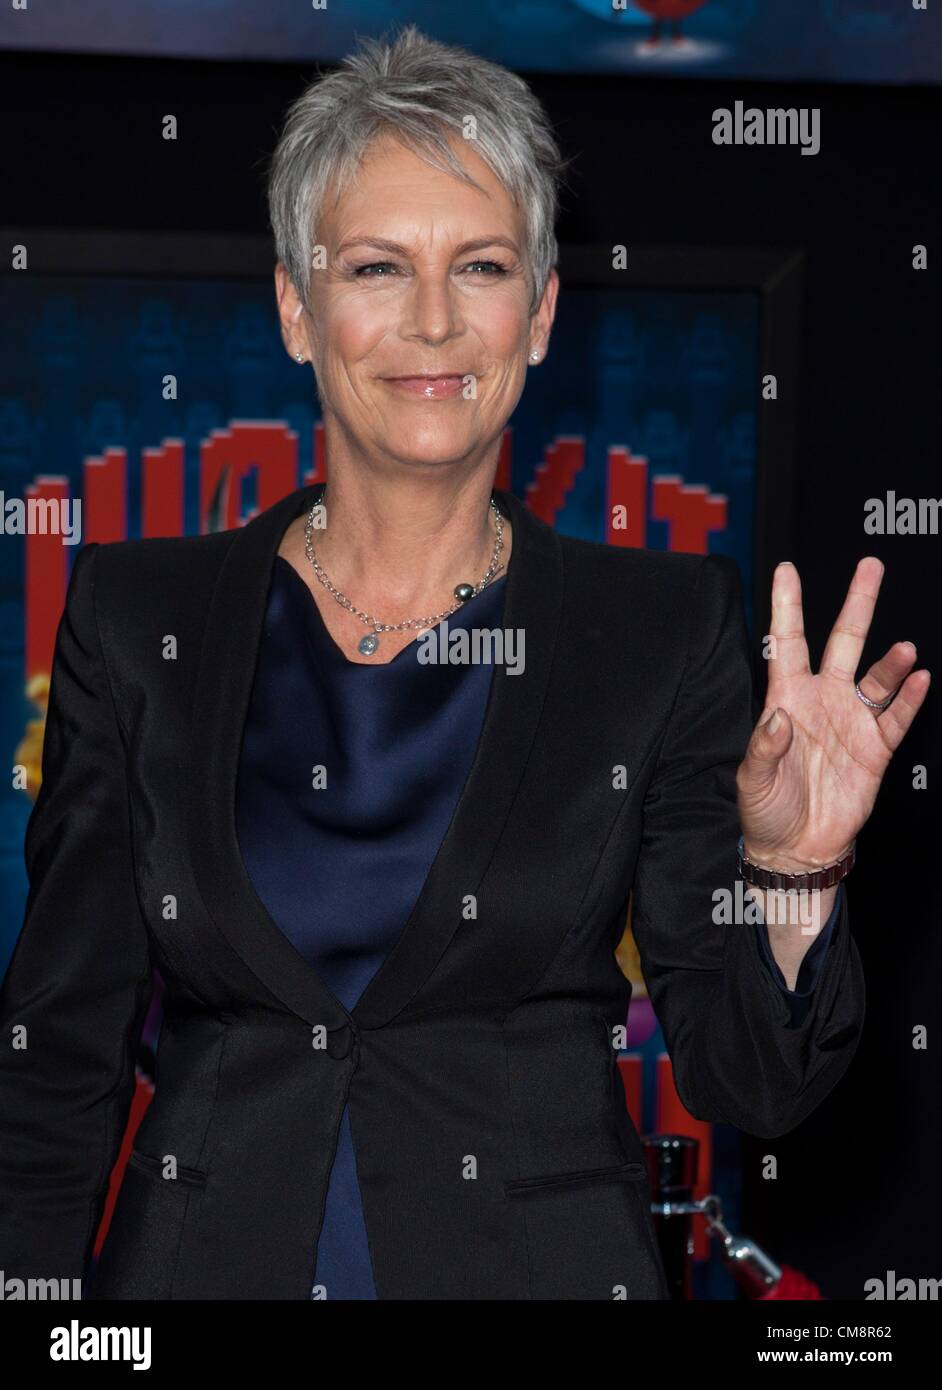 Jamie Lee Curtis at arrivals for WRECK-IT RALPH Premiere, El Capitan Theatre, Los Angeles, CA October 29, 2012. Photo By: Emiley Schweich/Everett Collection Stock Photo